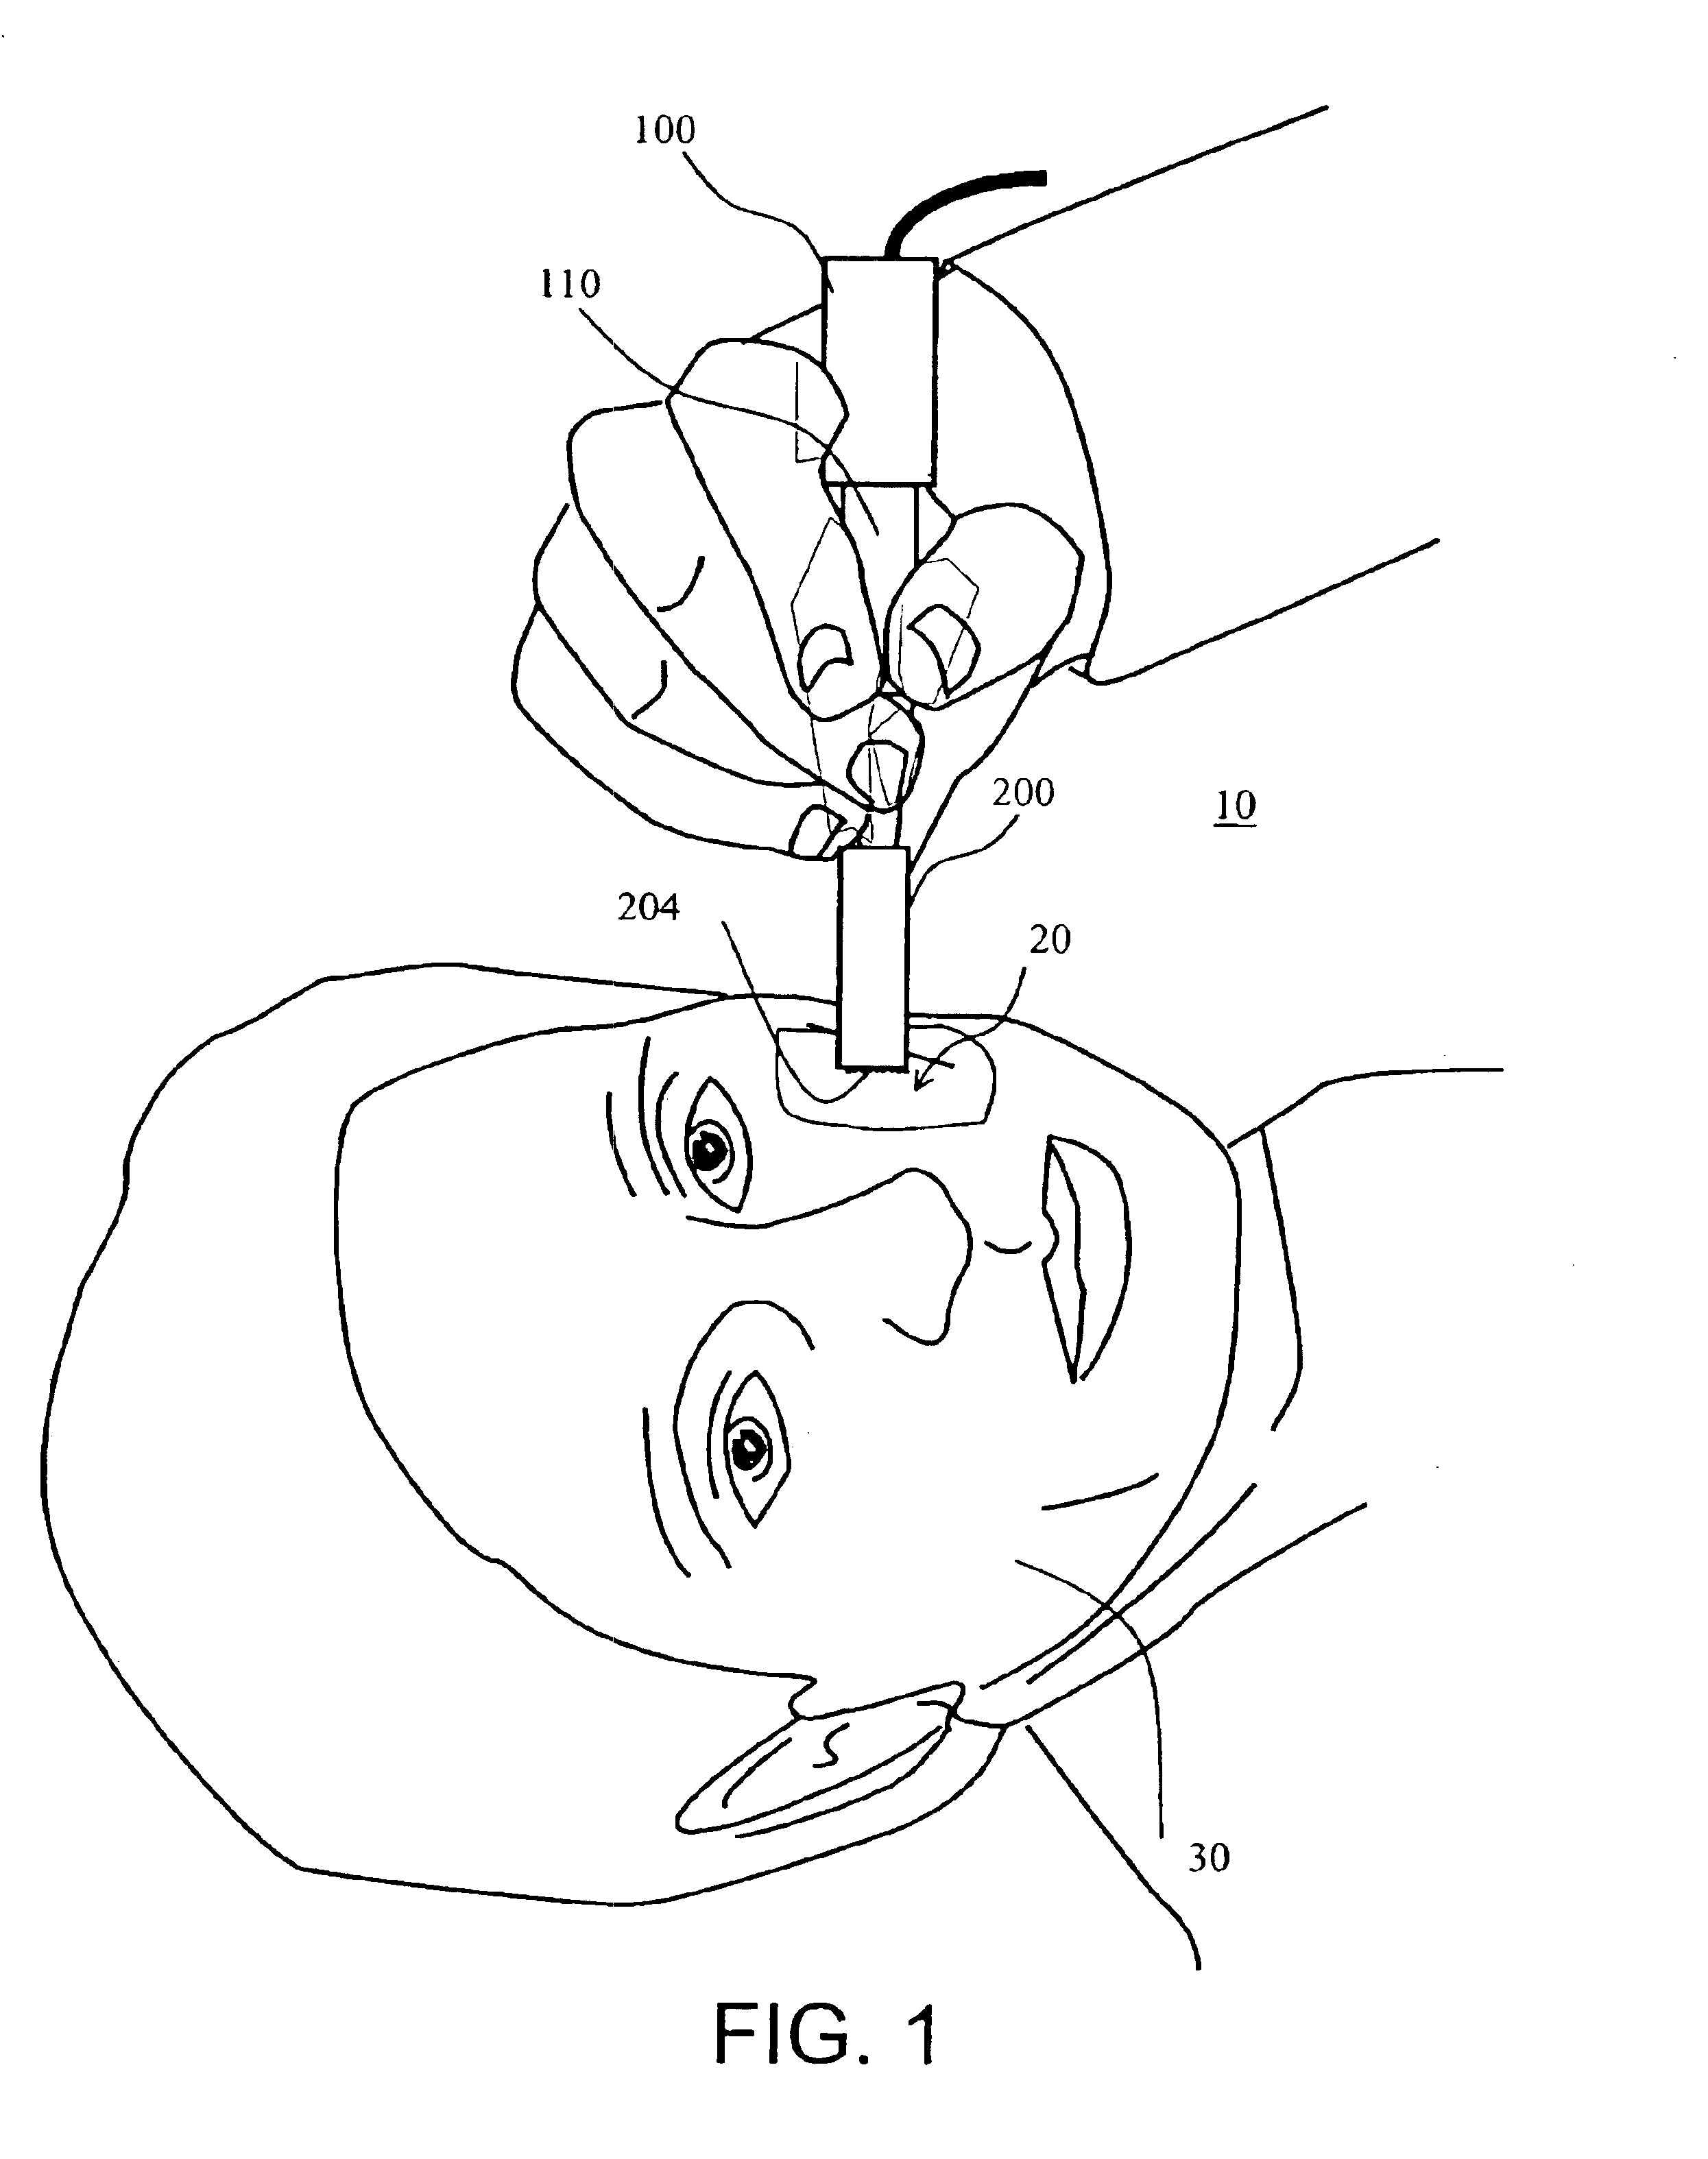 Method and apparatus for in-vivo transdermal and/or intradermal delivery of drugs by sonoporation